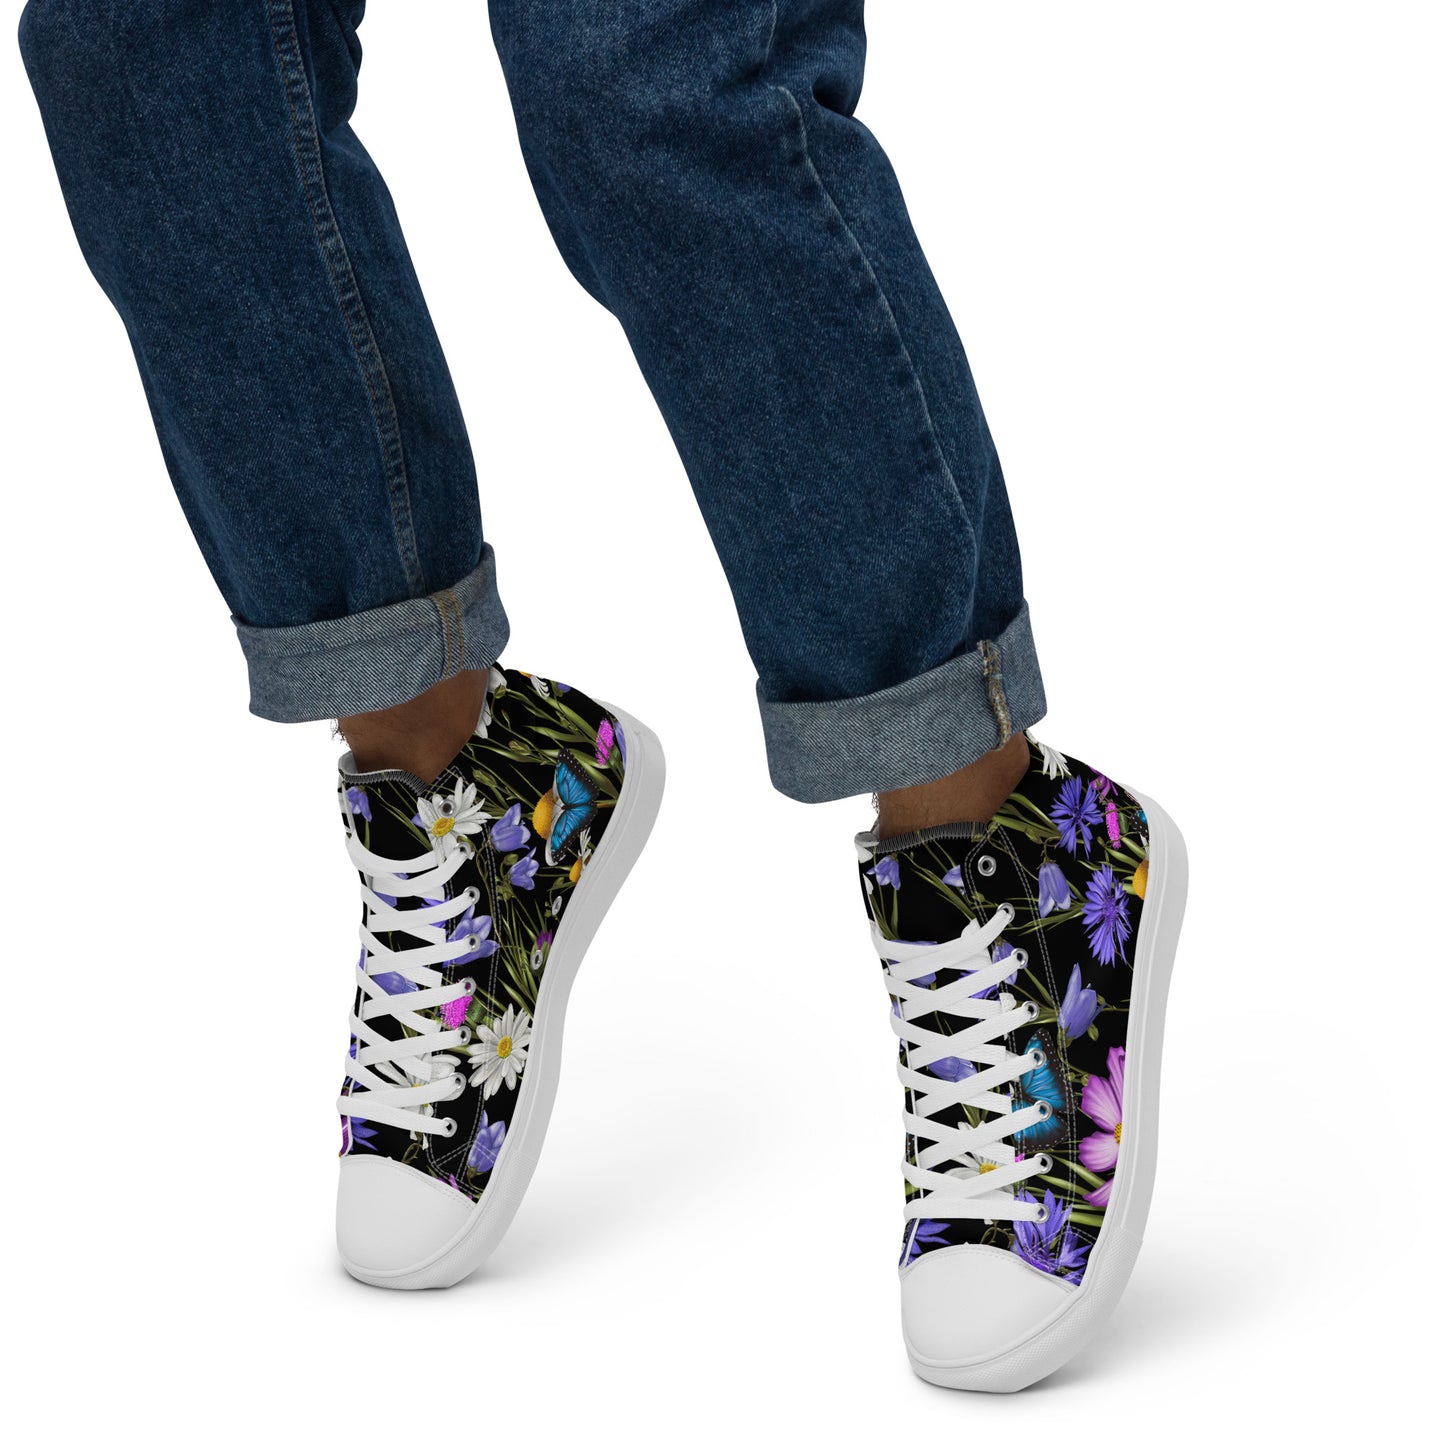 Butterfly Flowers - Men’s high top canvas shoes Mens High Top Shoes